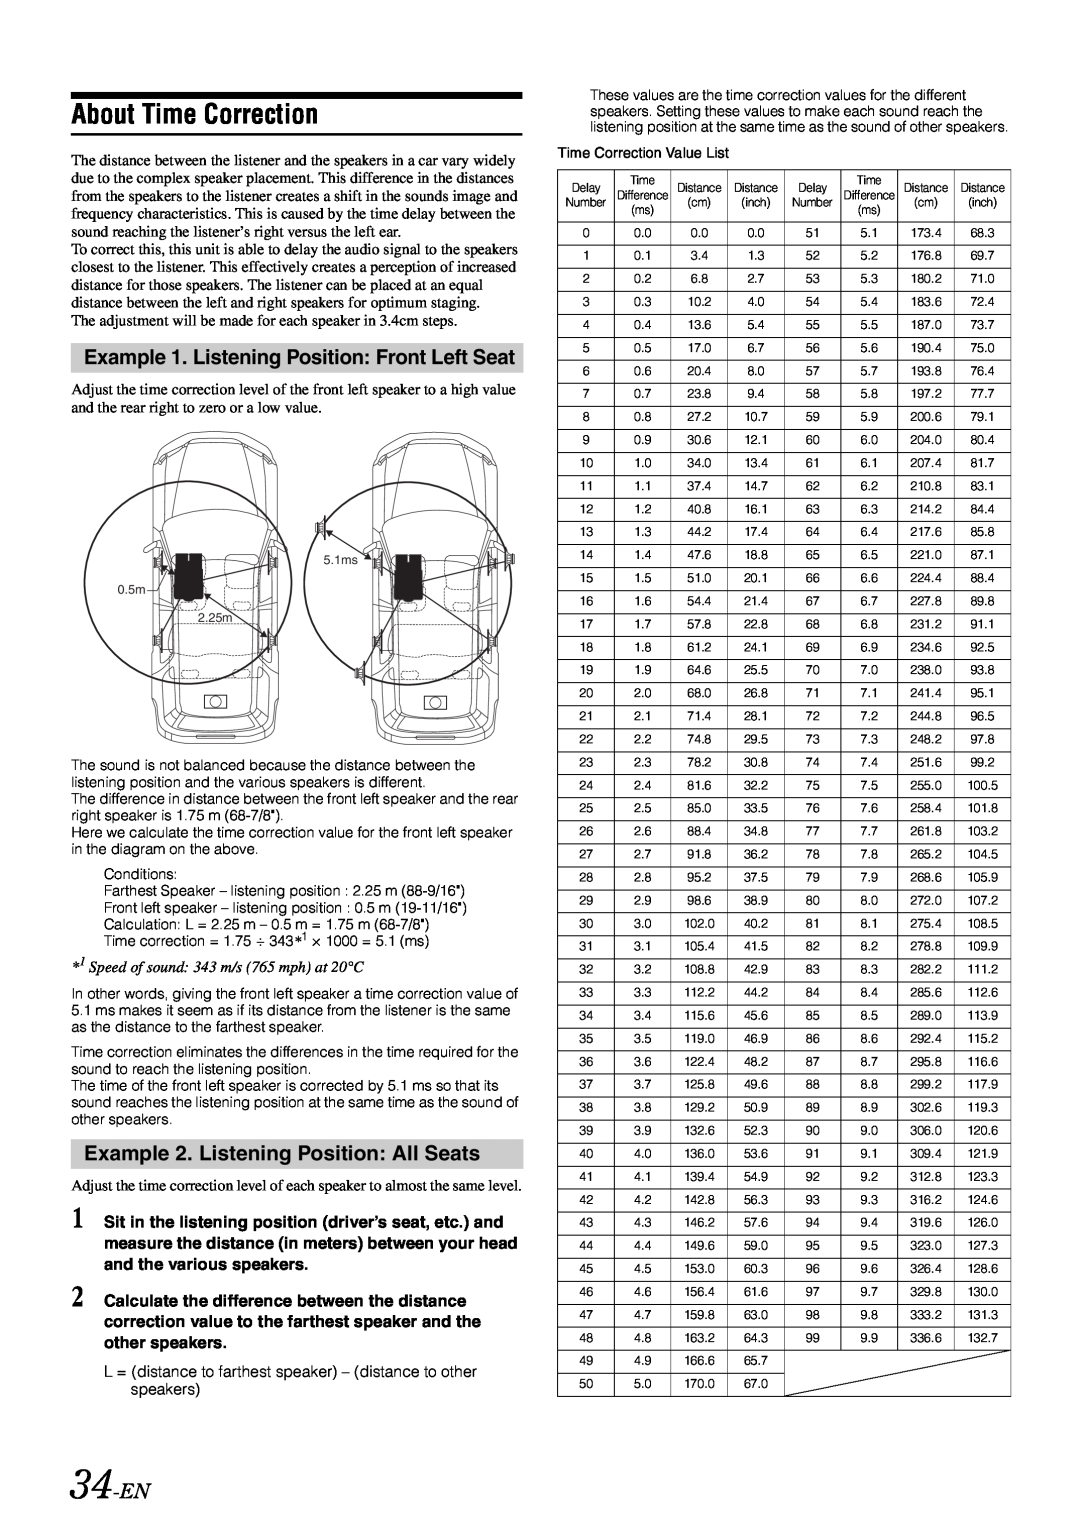 Alpine iDA-305 owner manual About Time Correction, Example 1. Listening Position Front Left Seat, 34-EN 